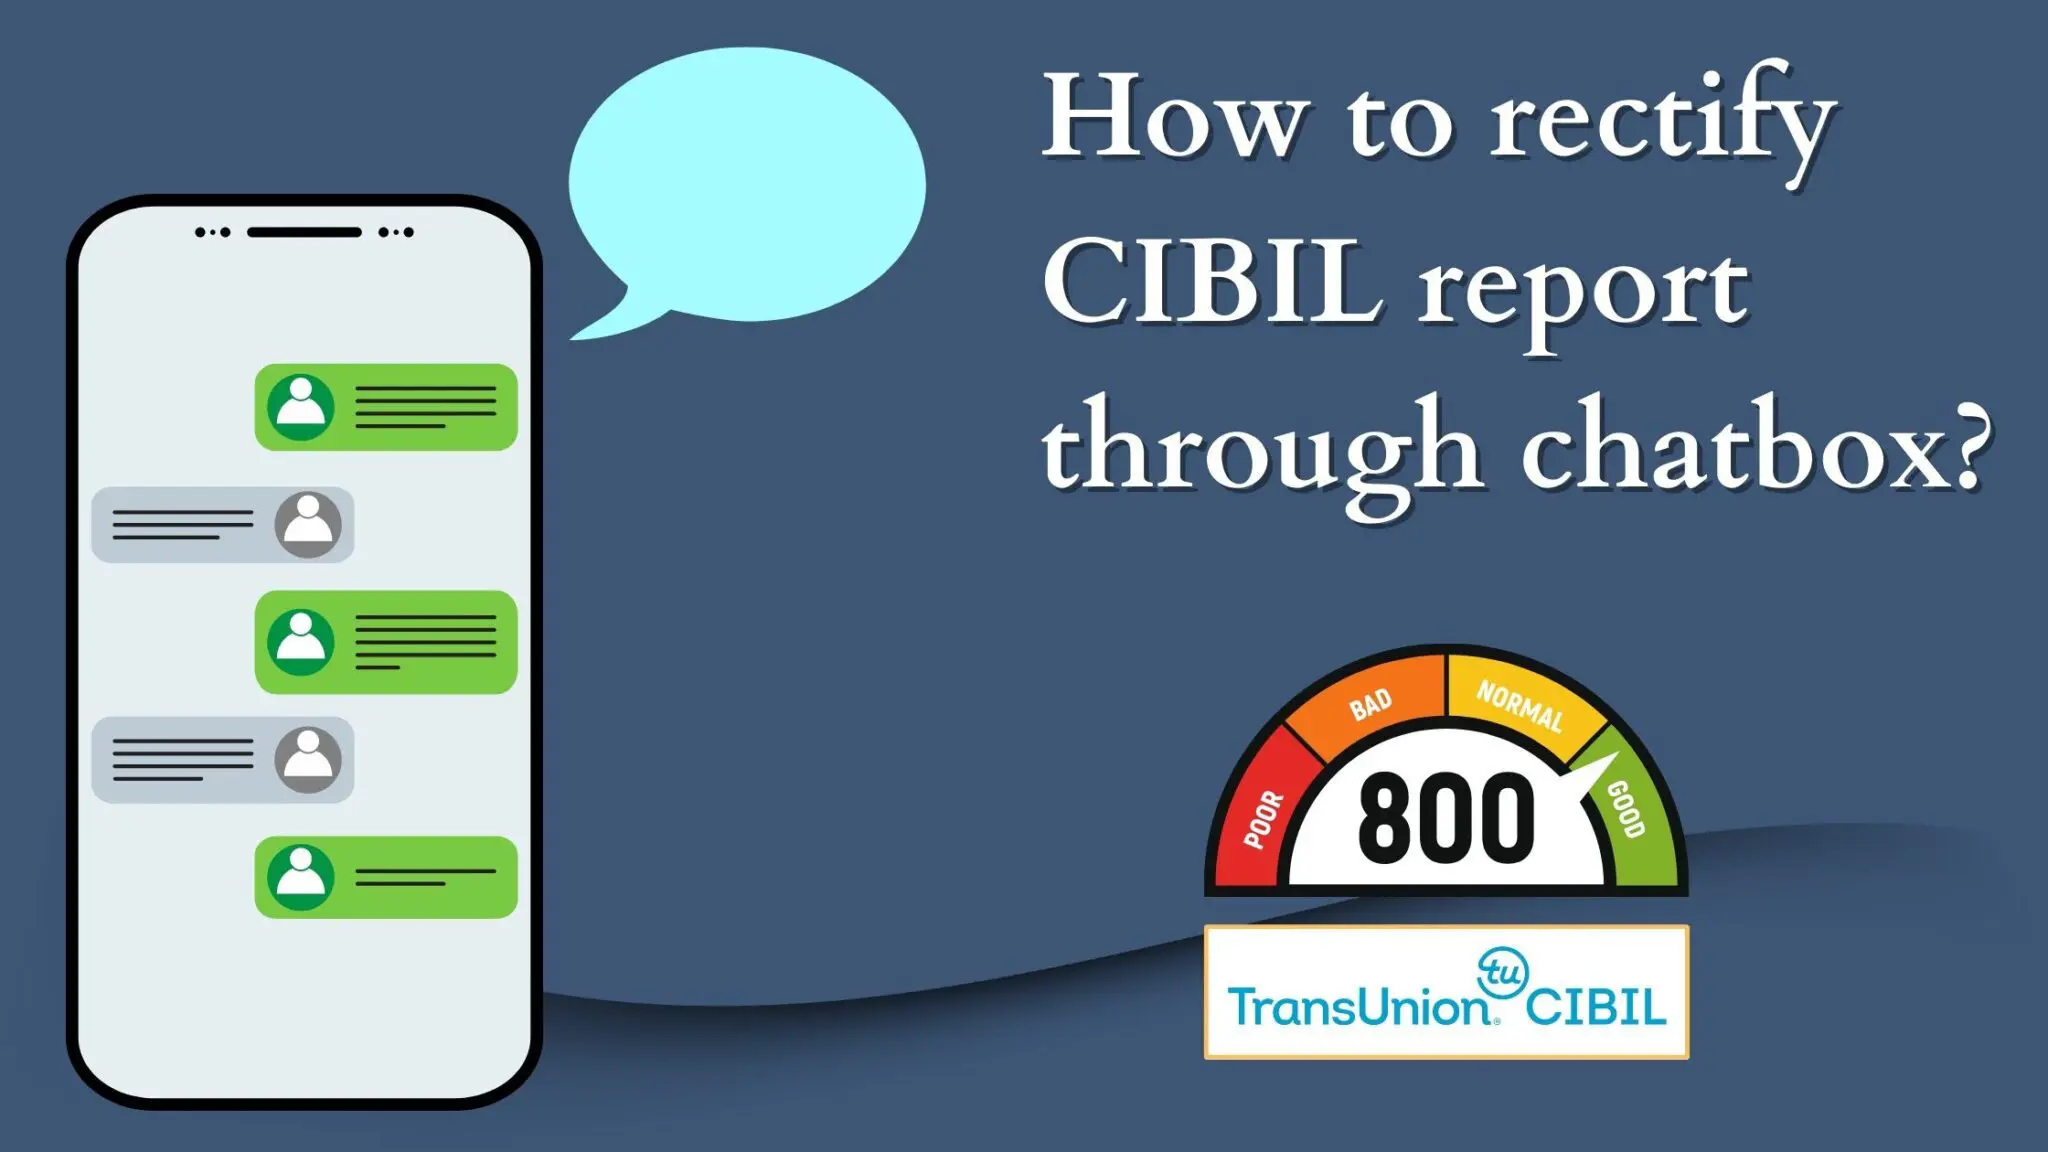 How to check free CIBIL report?